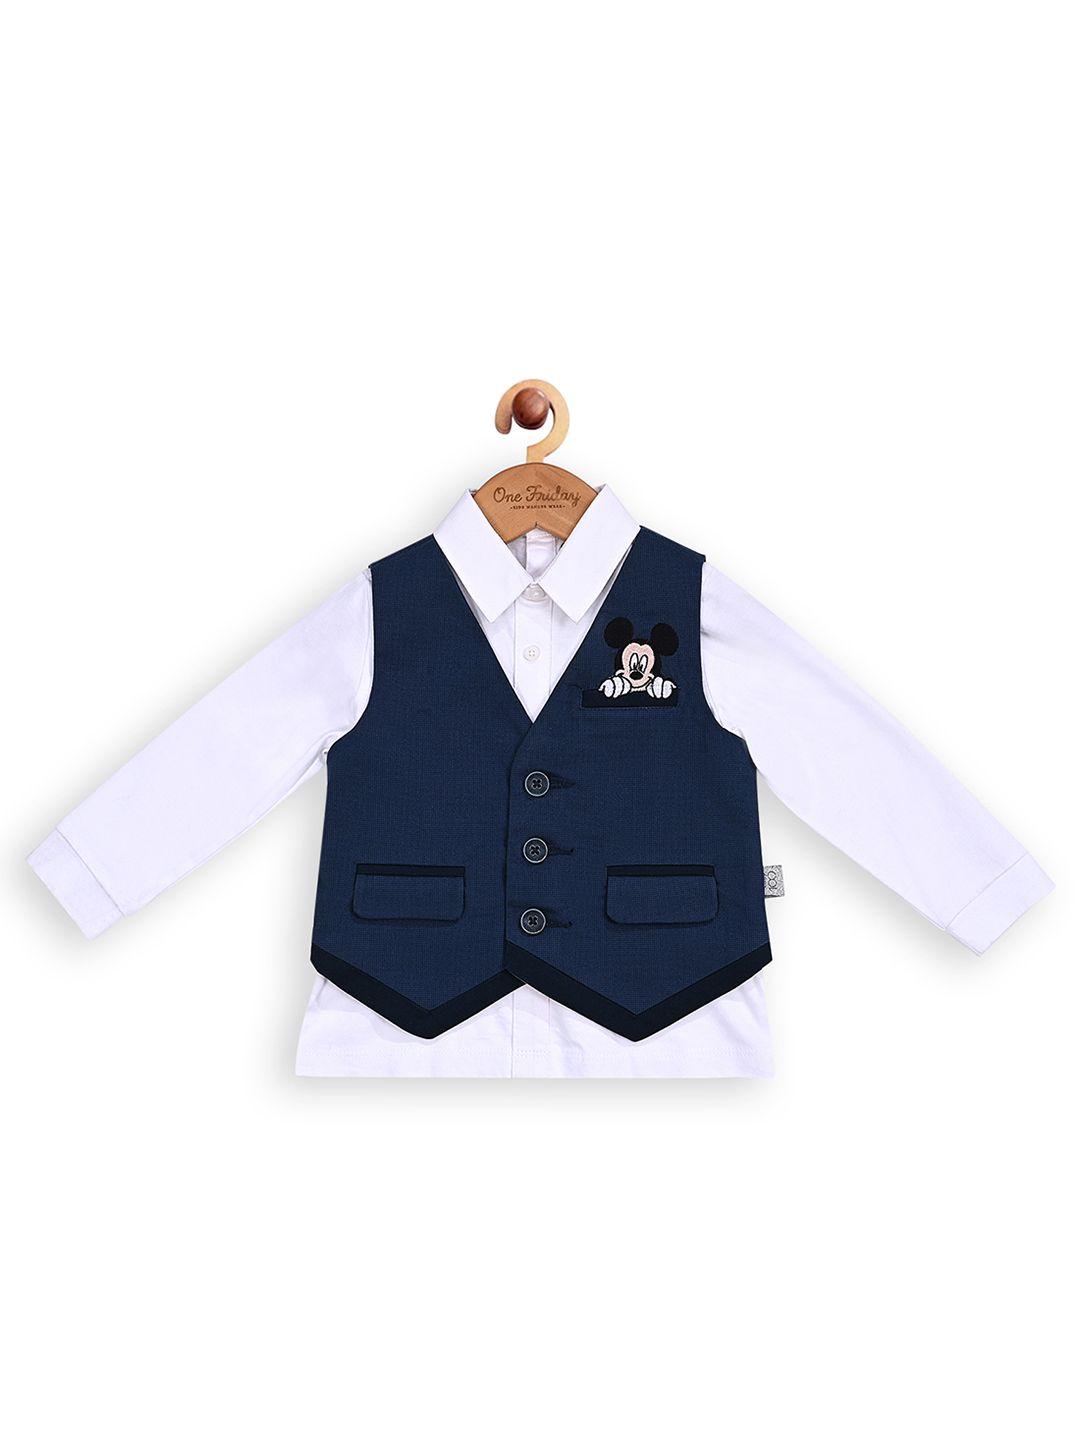 one friday infants boys checked mickey printed waistcoat comes with shirt